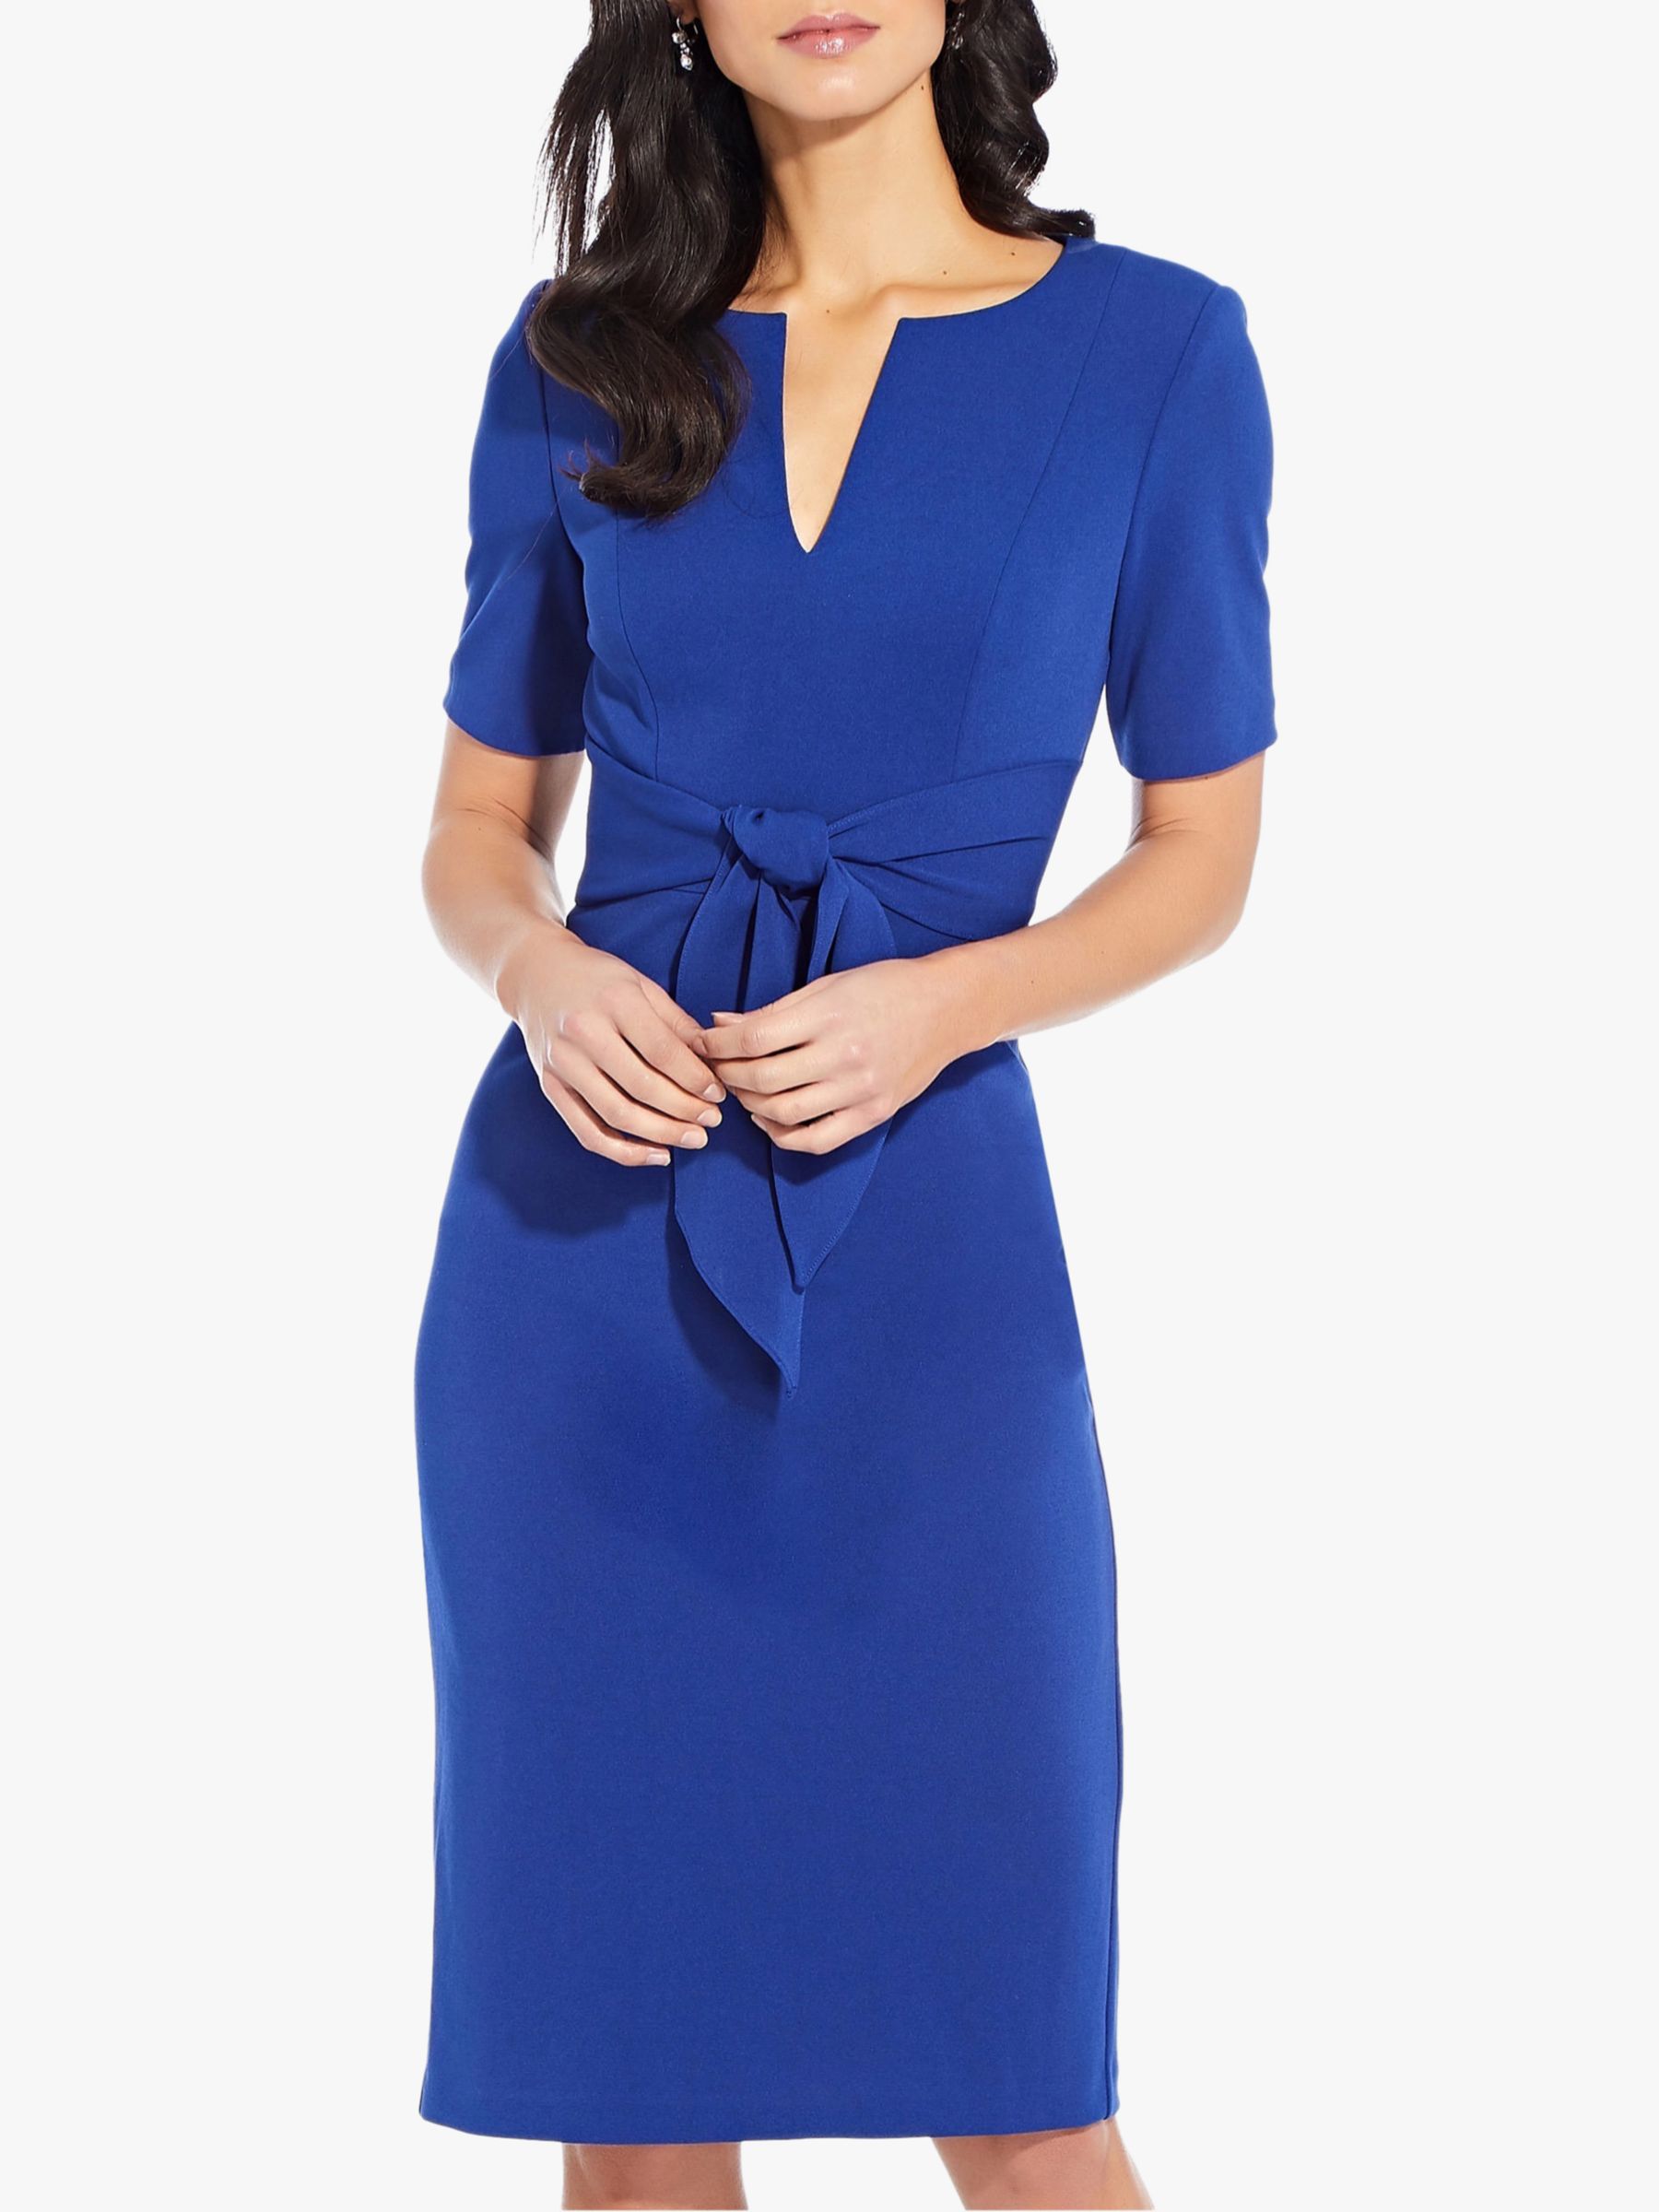 Adrianna Papell Knit Crepe Knee Length Dress at John Lewis & Partners